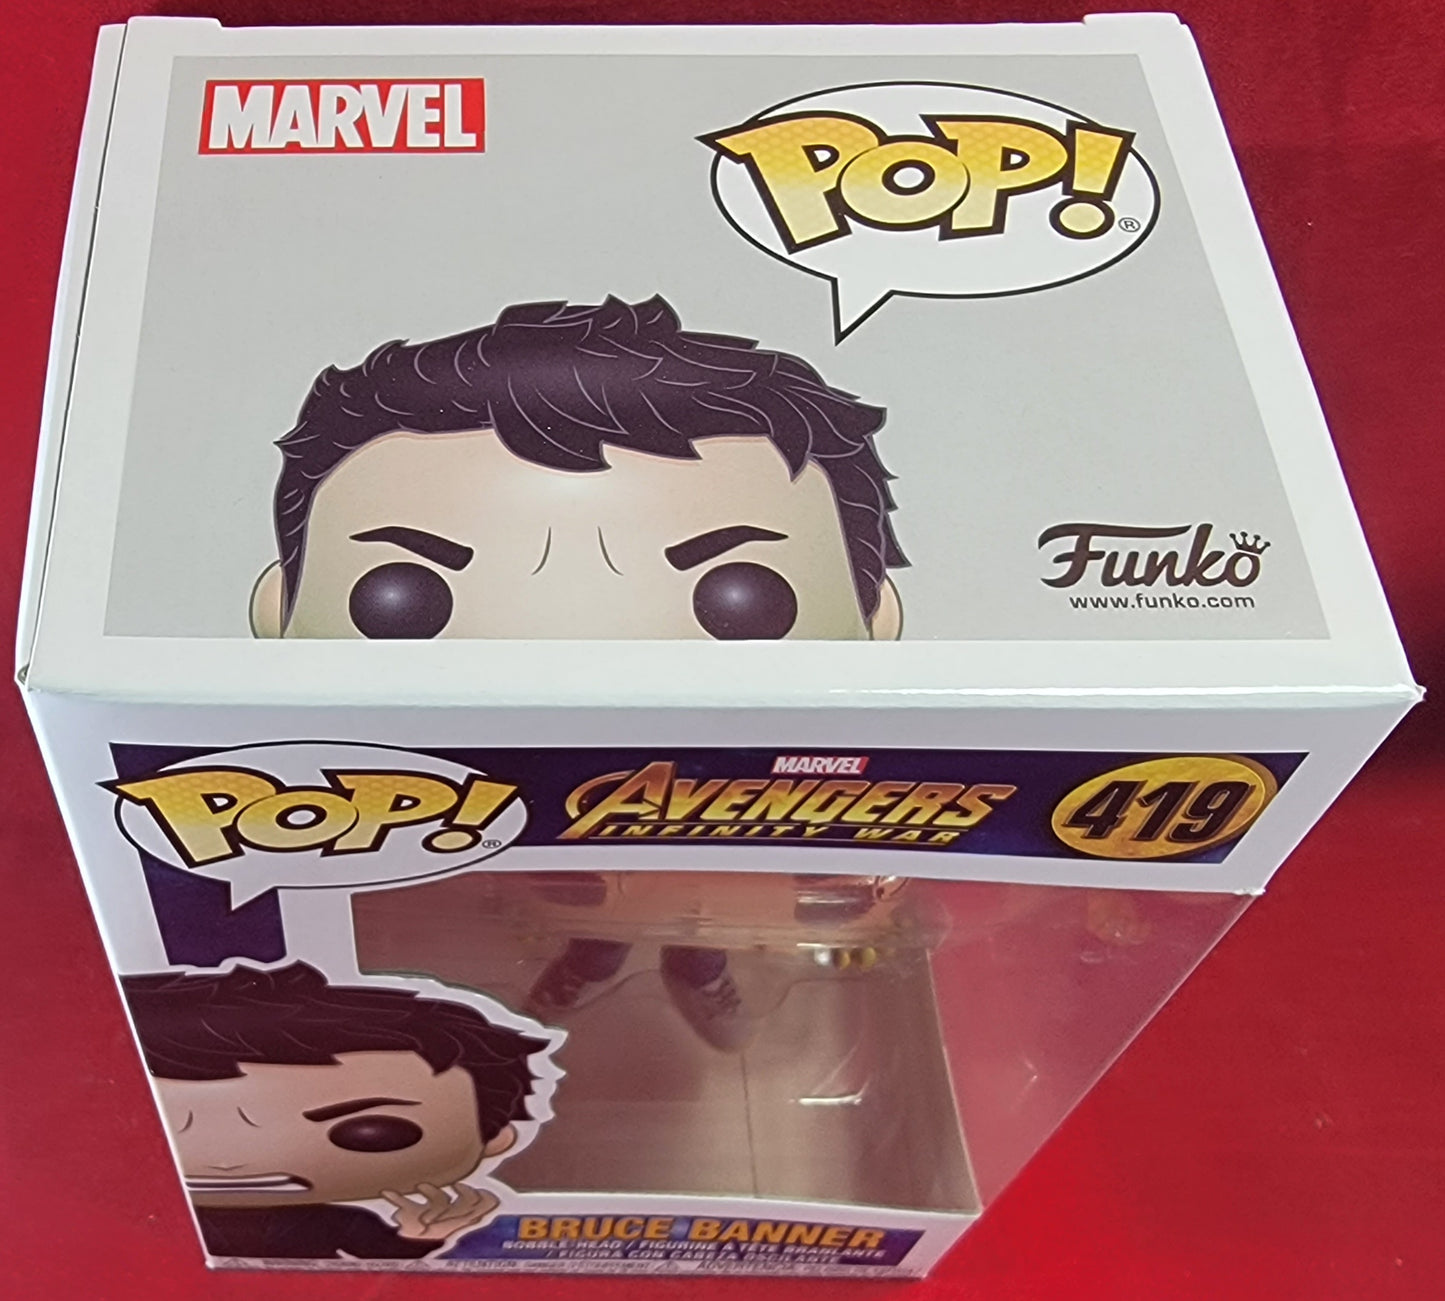 Bruce banner funko # 419 (nib)
brand new 2018 avengers infinity war Bruce banner (mark ruffalo) funko pop. pop has Bruce starting to turn into the hulk. pop has banner with lite scratches on the plastic and will be shipped in a compatible pop protector.